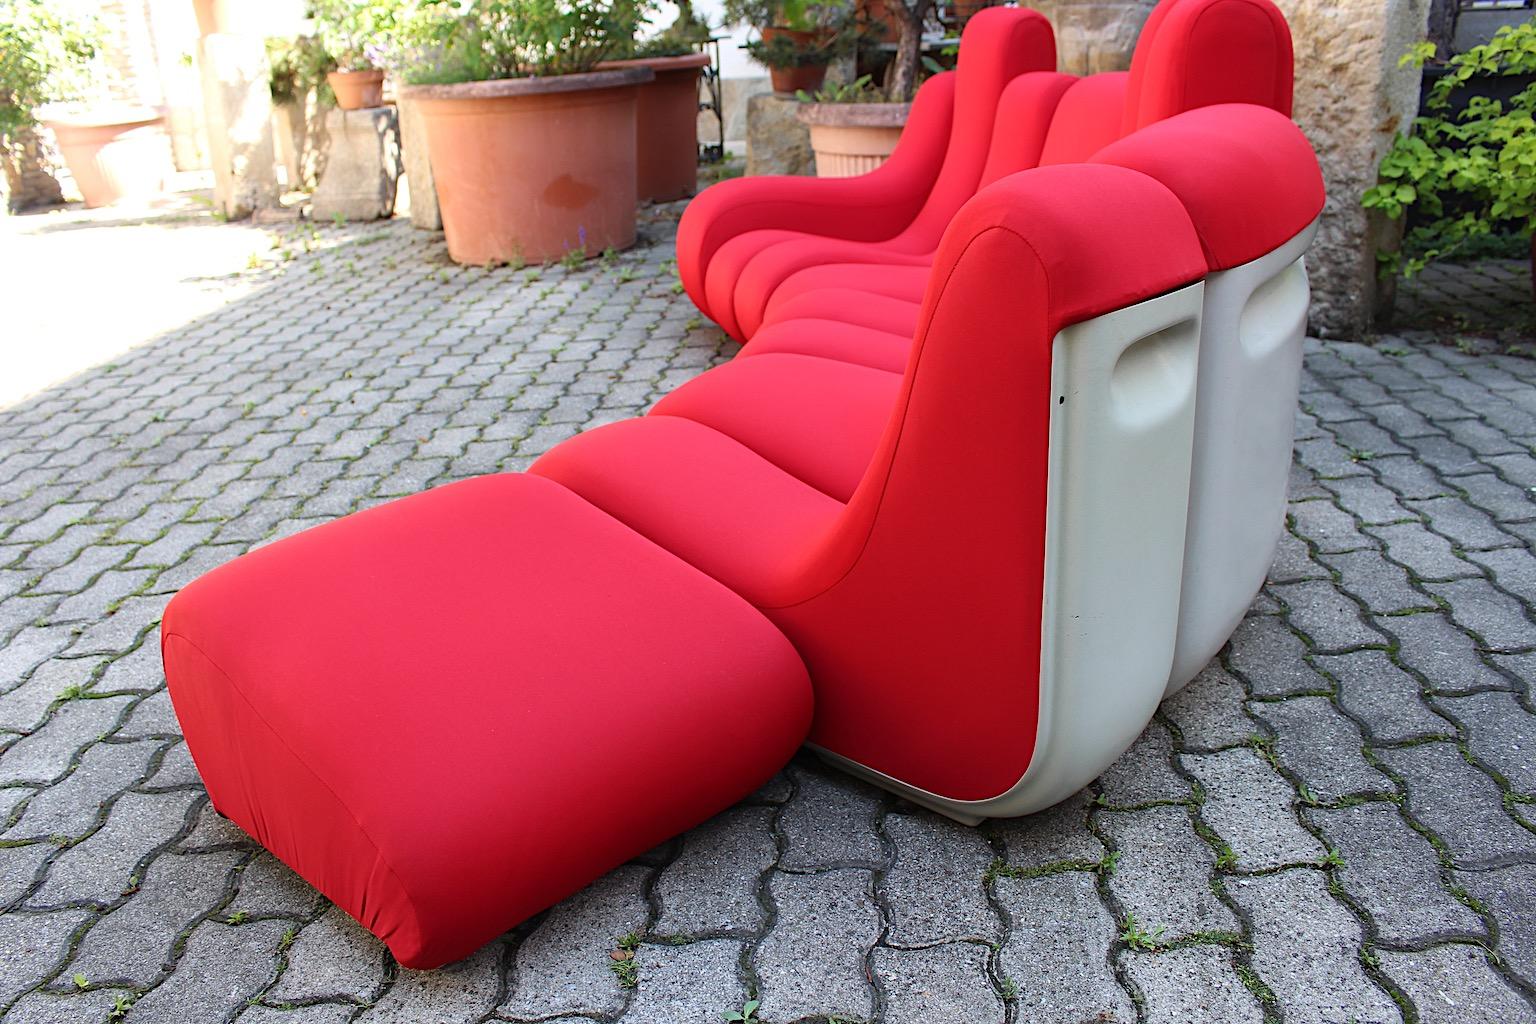 Space Age Vintage Red Sectional Freestanding Sofa Vario Pillo Burghardt Vogtherr For Sale 8